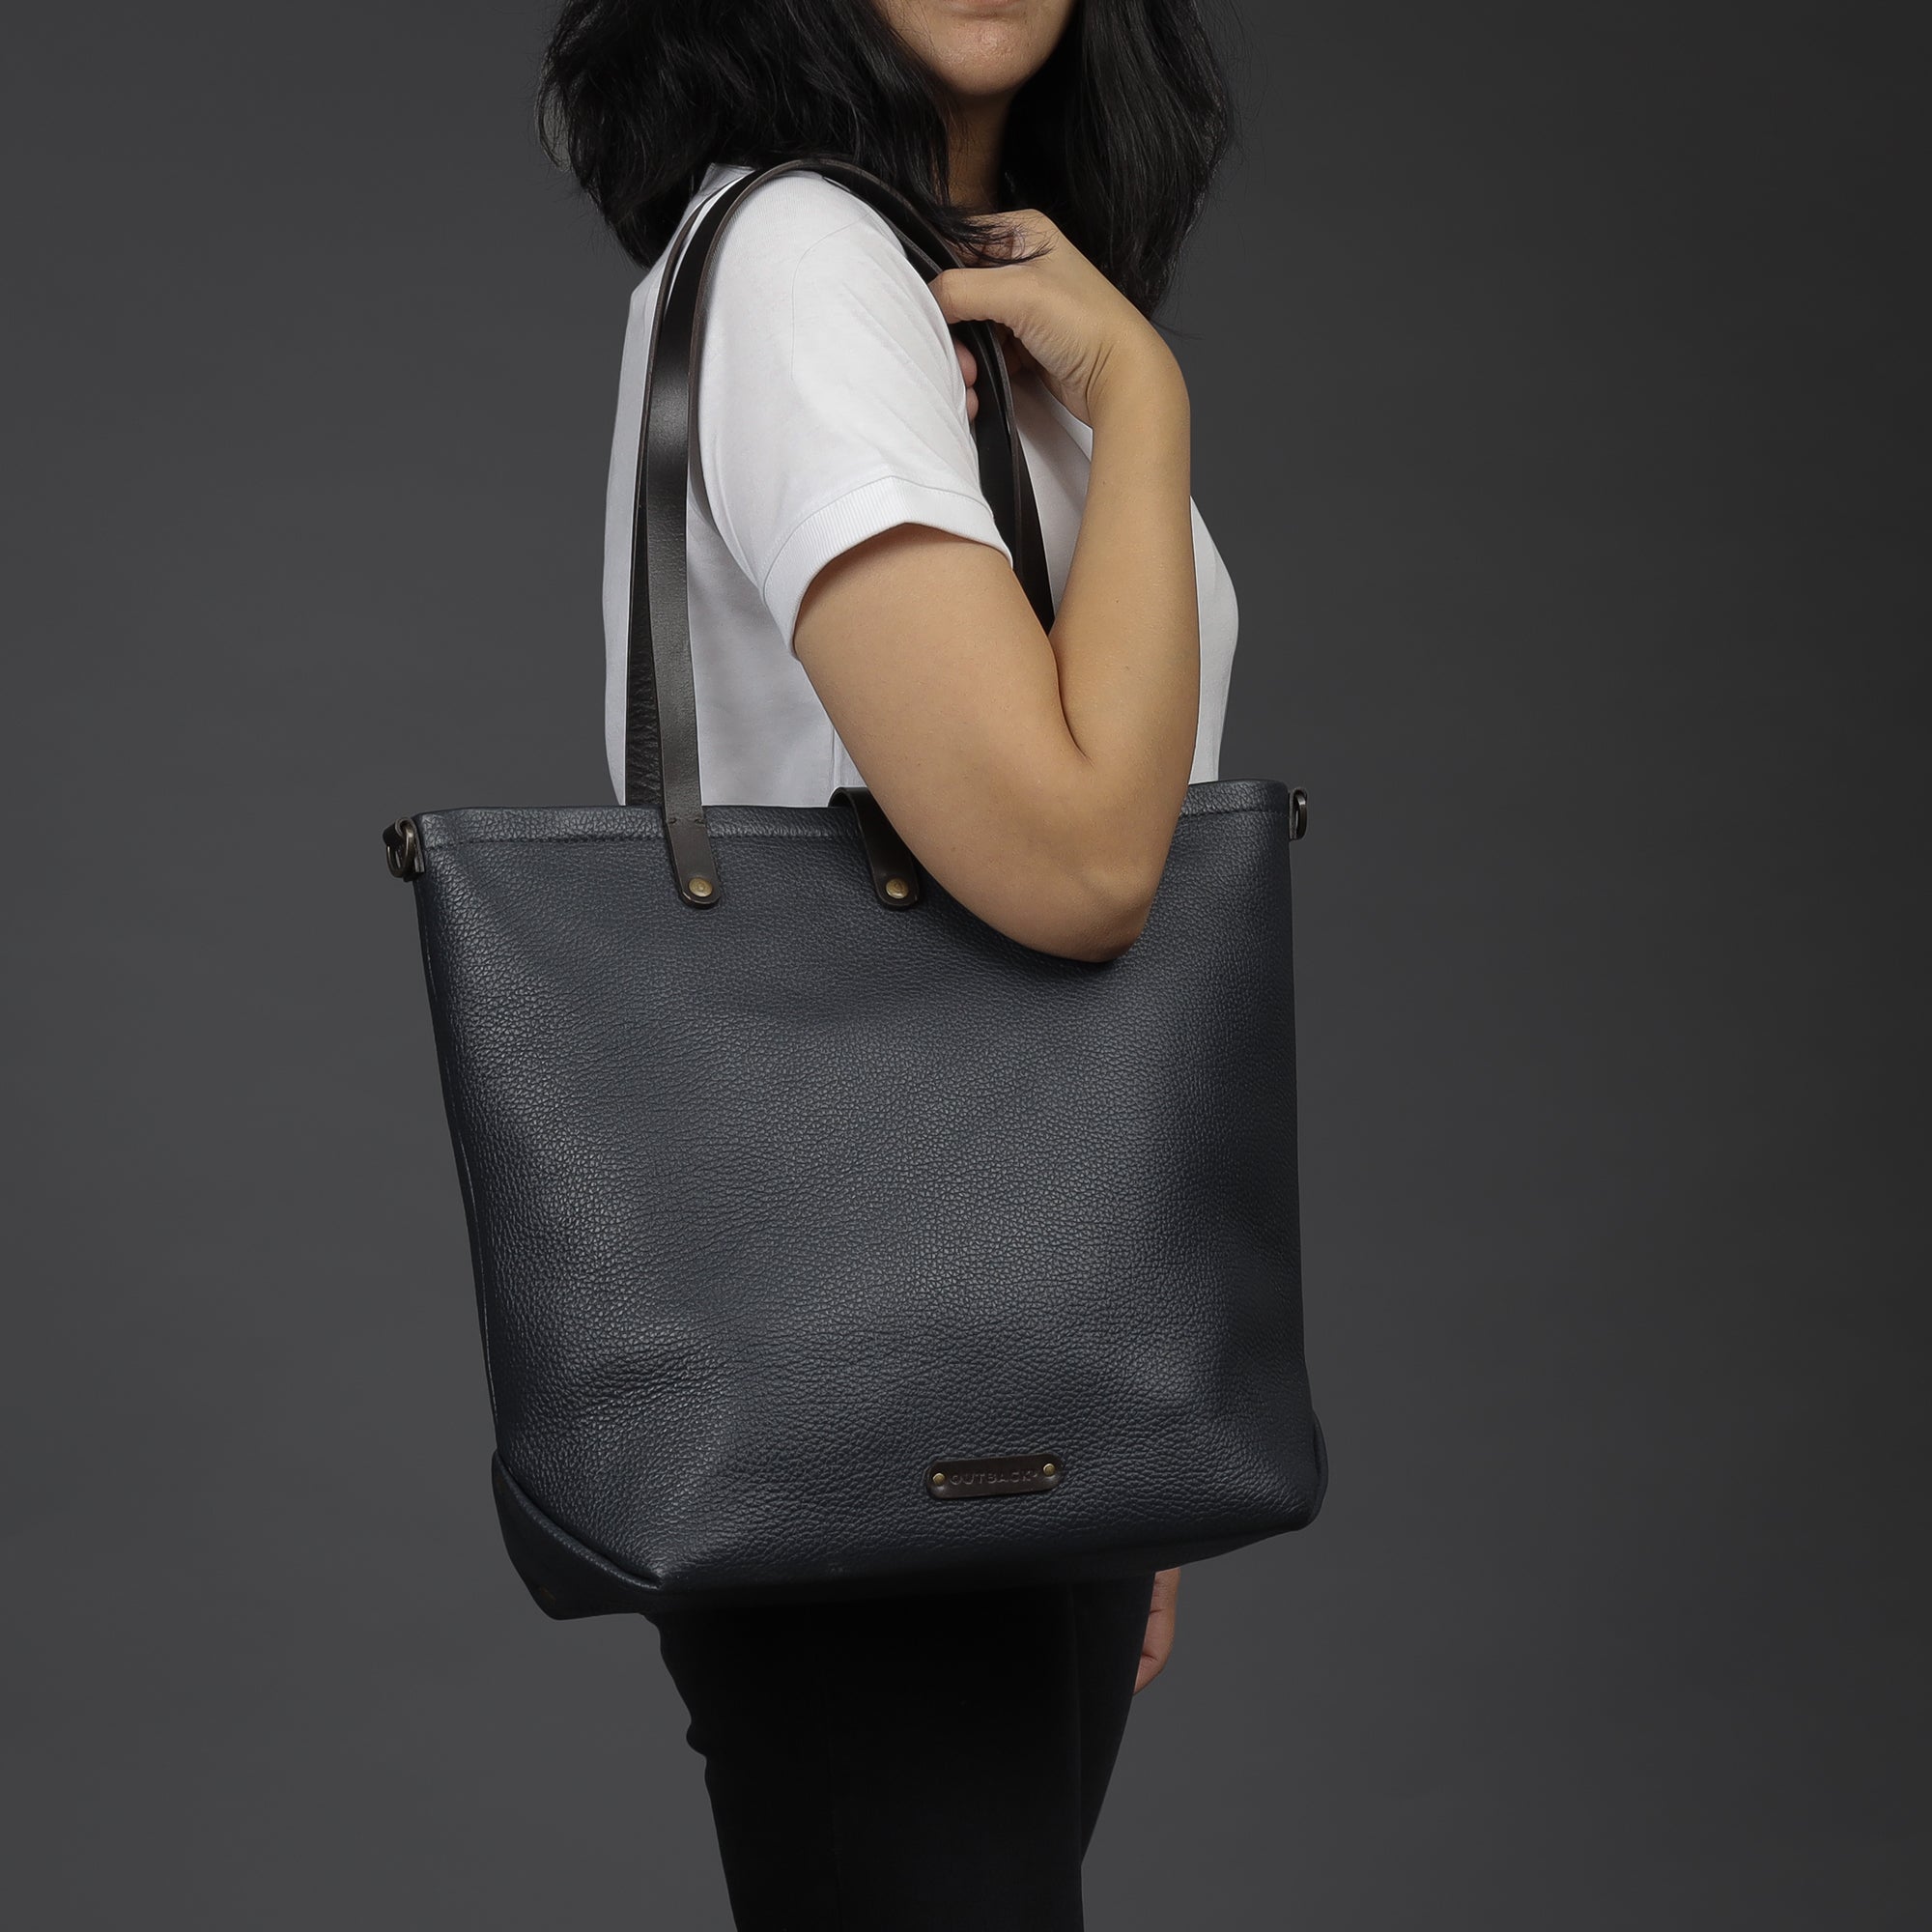 Leather tote for shopping